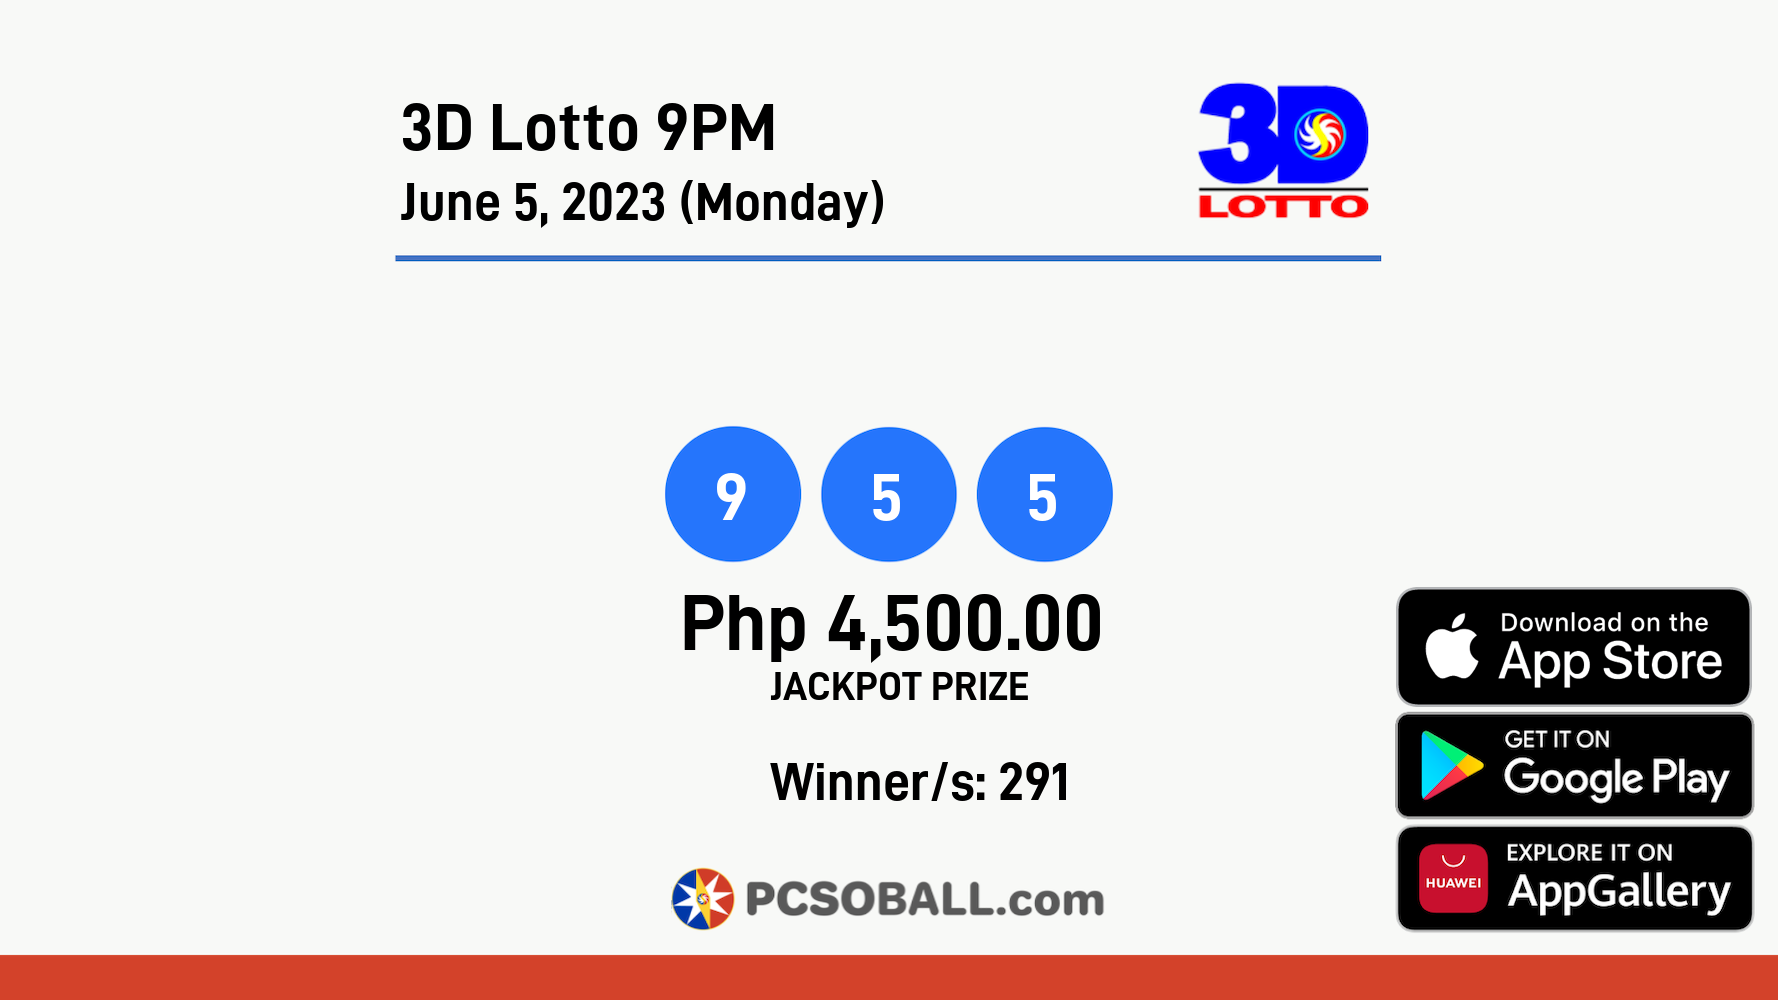 3D Lotto 9PM June 5, 2023 (Monday) Result